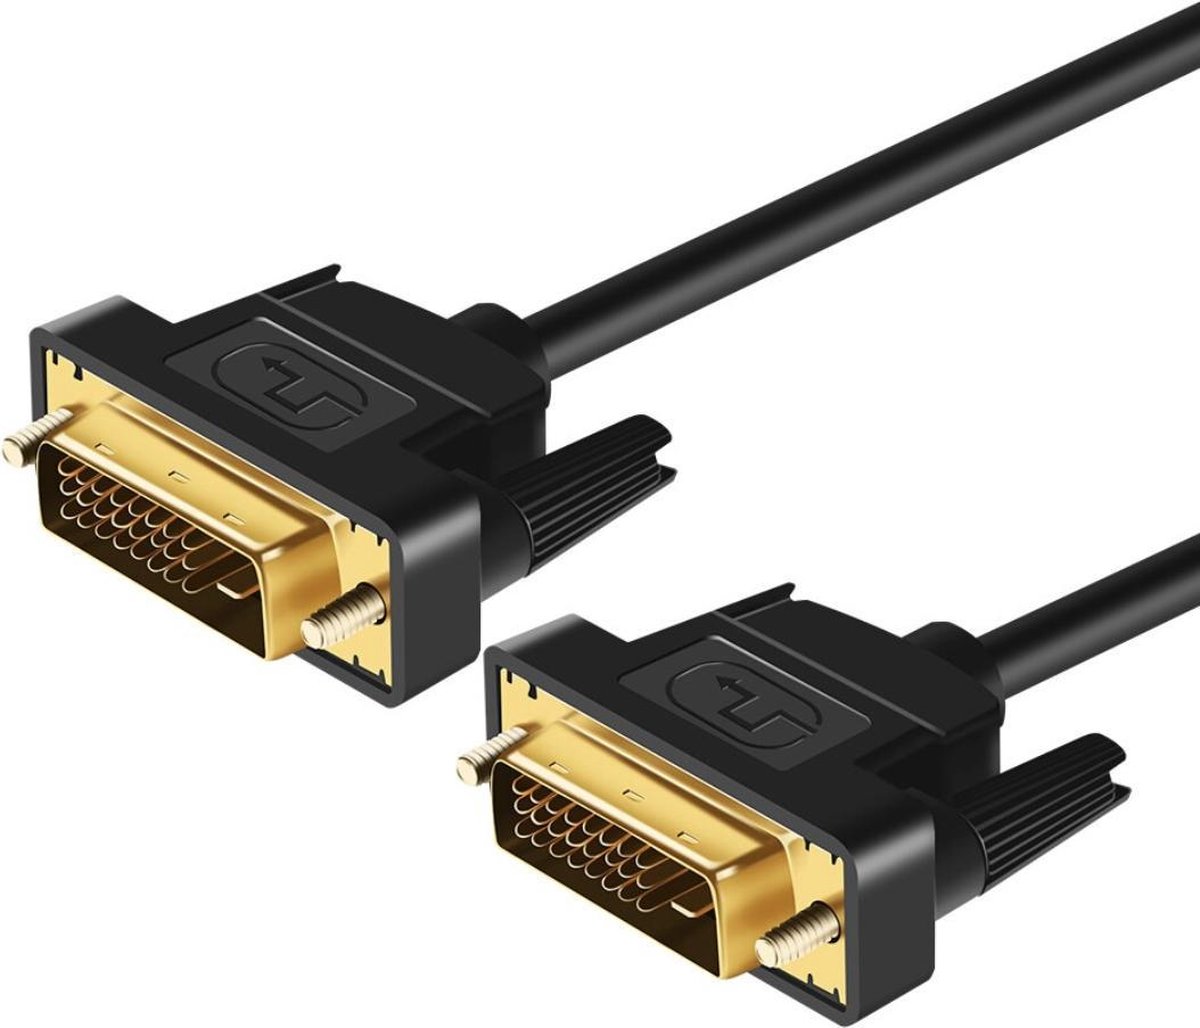 WiseGoods DVI naar DVI Kabel Male to Male - Monitor Kabel - Plug and Play - 24+1 Pin Kabel - Gold Plated - 2 Meter